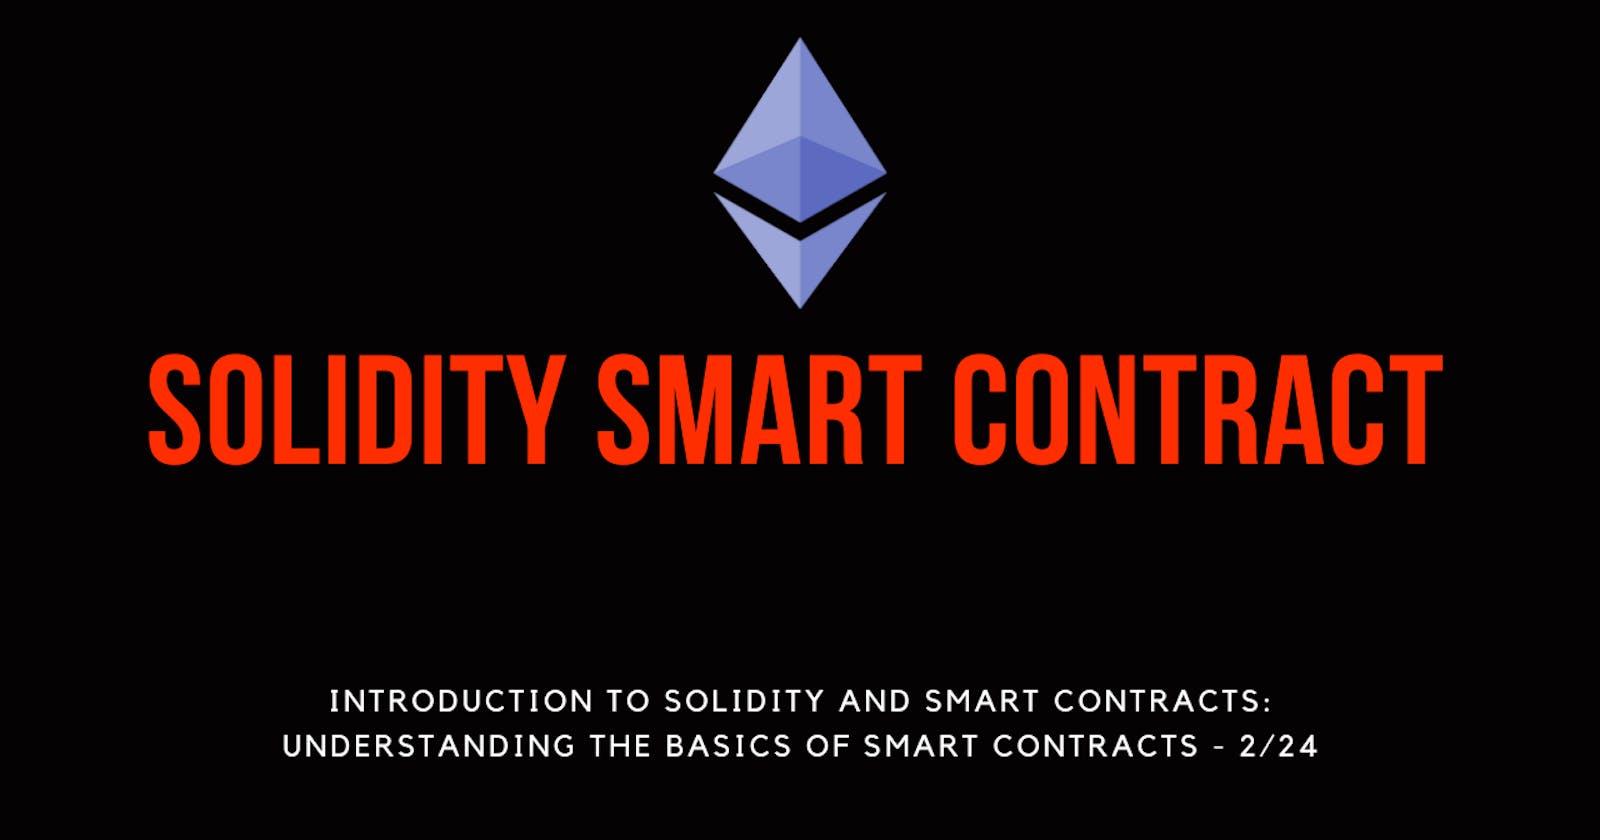 Introduction to Solidity and Smart Contracts: Understanding the Basics of Smart Contracts